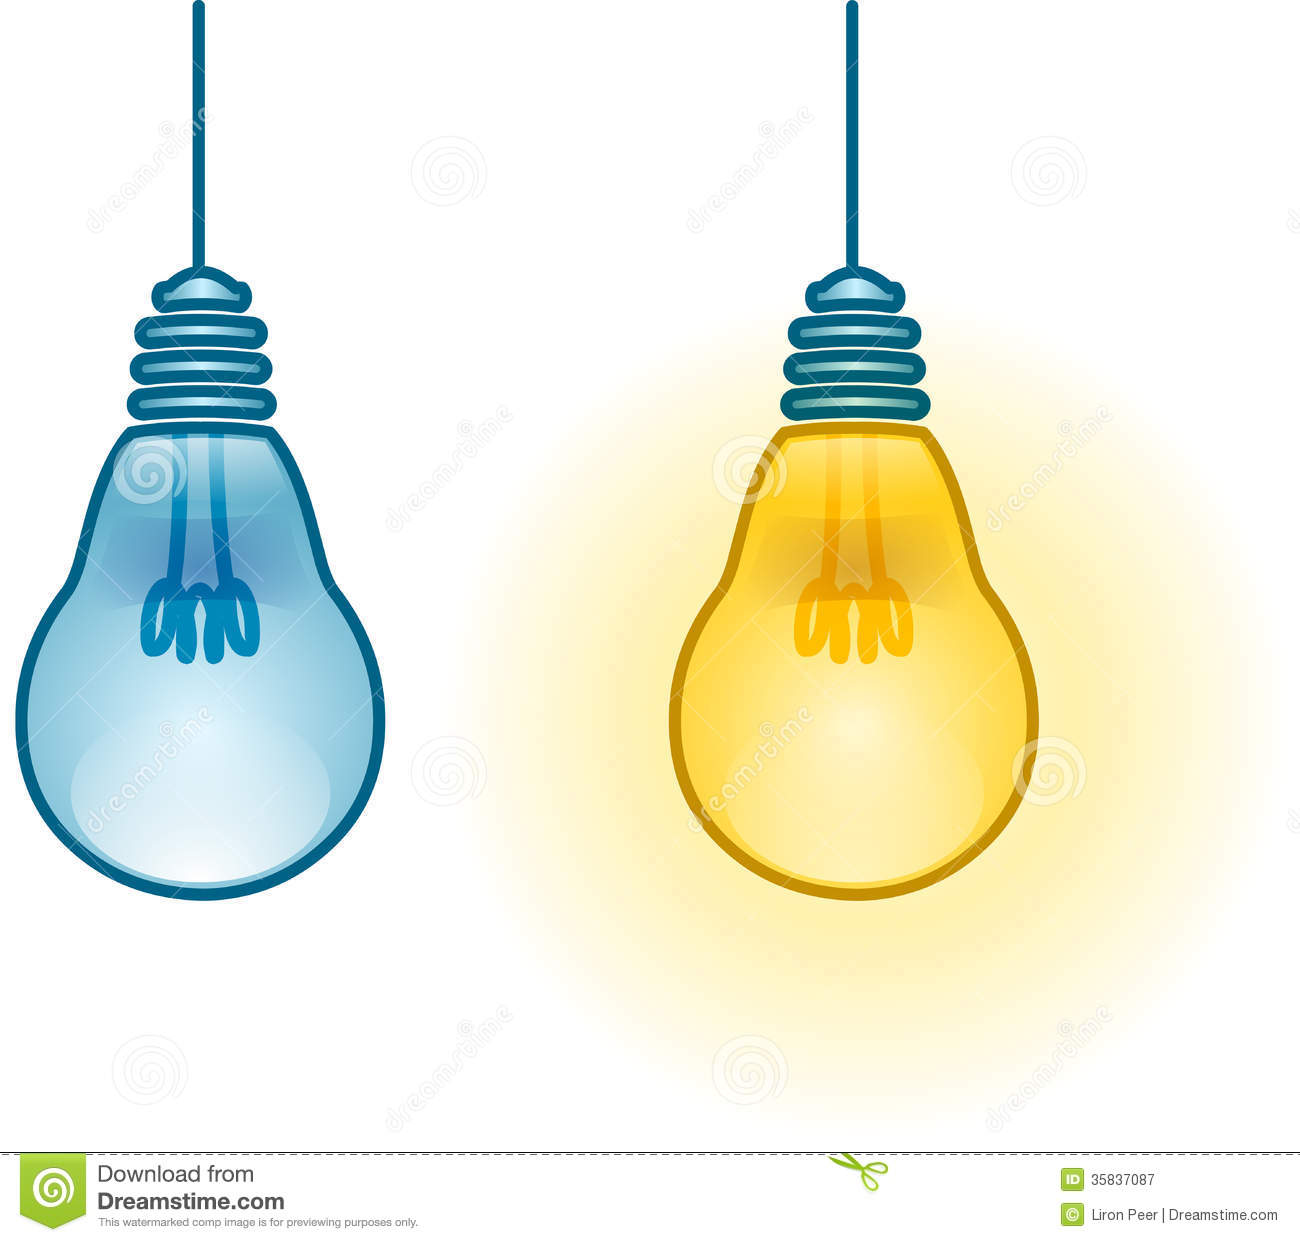 Lightbulb Turned On And Off Royalty Free Stock Photography   Image